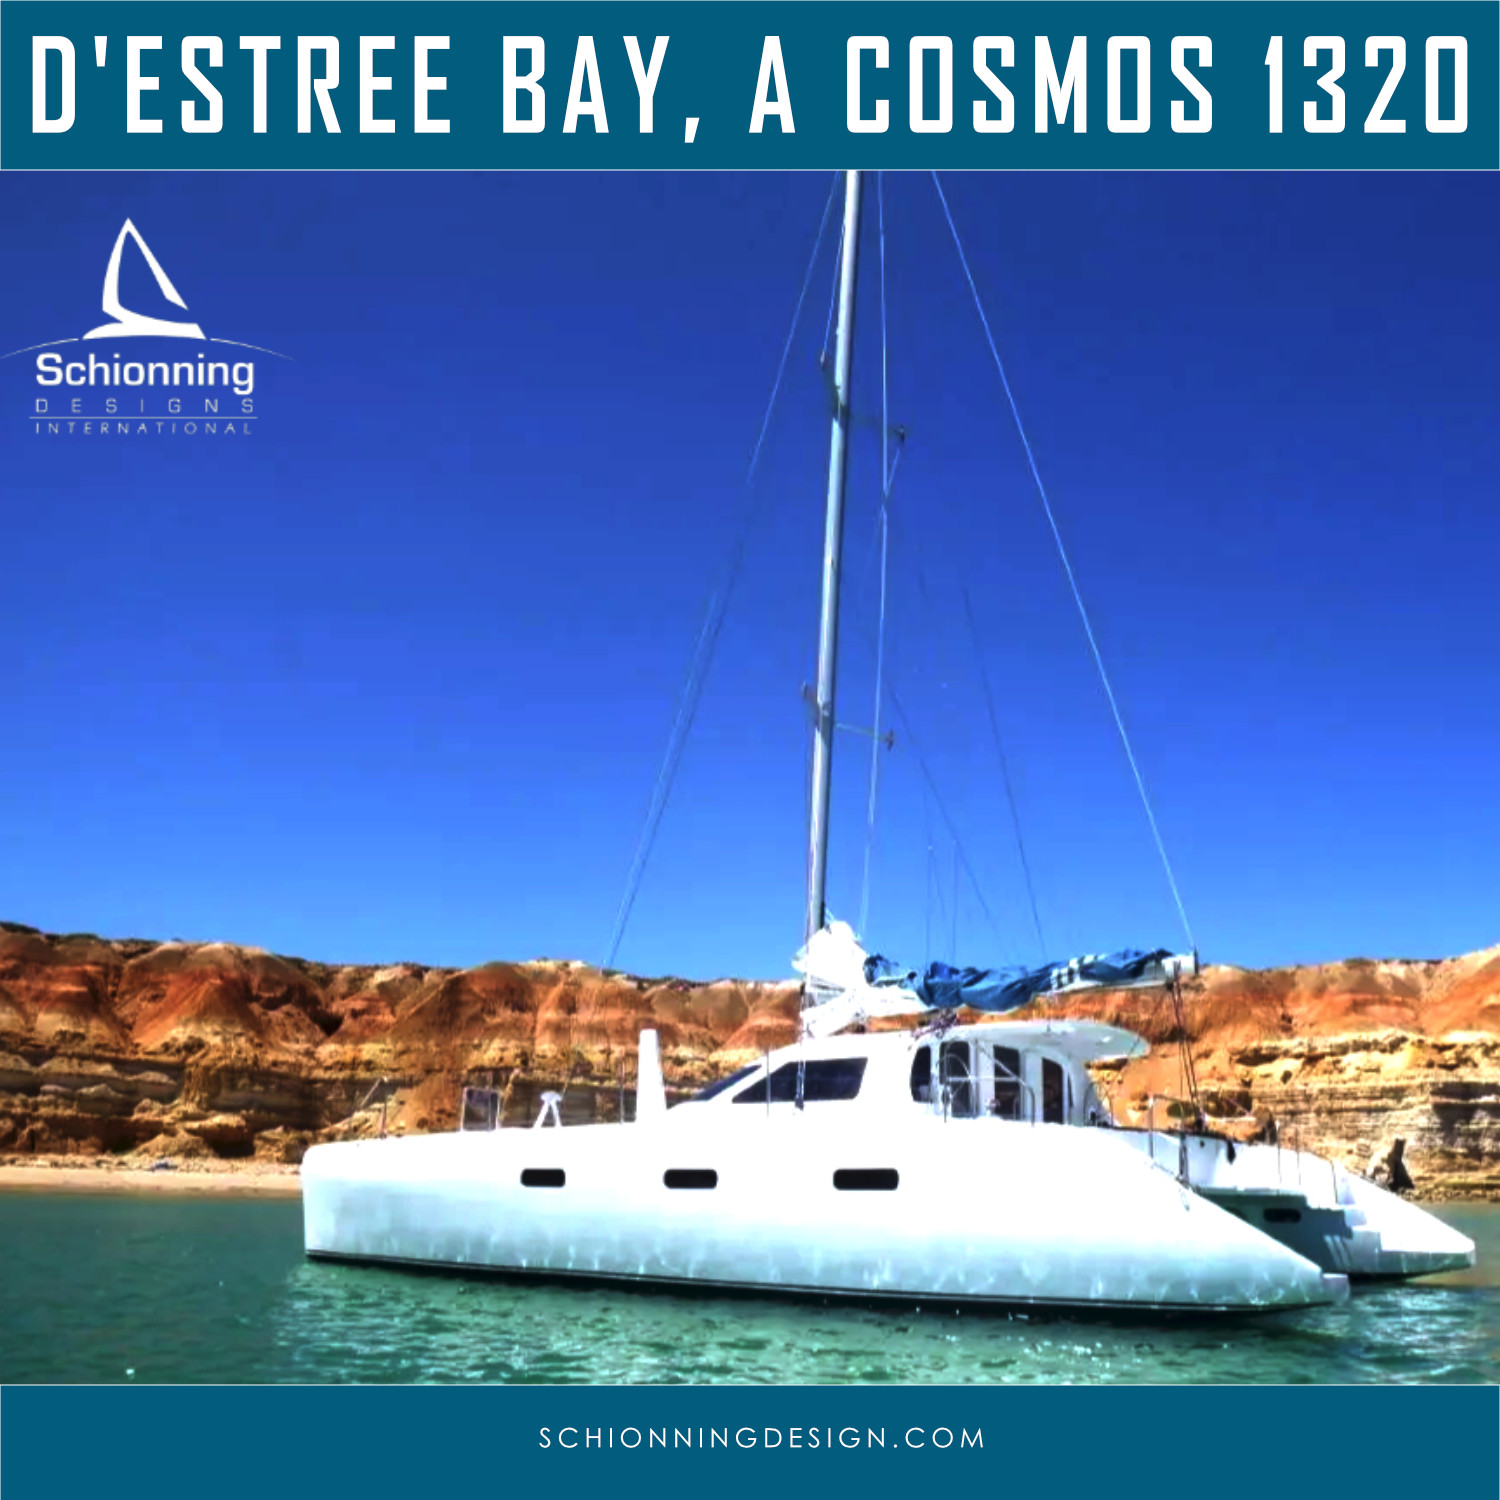 The owner of D'Estree Bay, a Cosmos 1320 Catamaran Design by Schionning Designs, writes about his experiences sailing aboard the boat during a delivery from Australia to Asia.